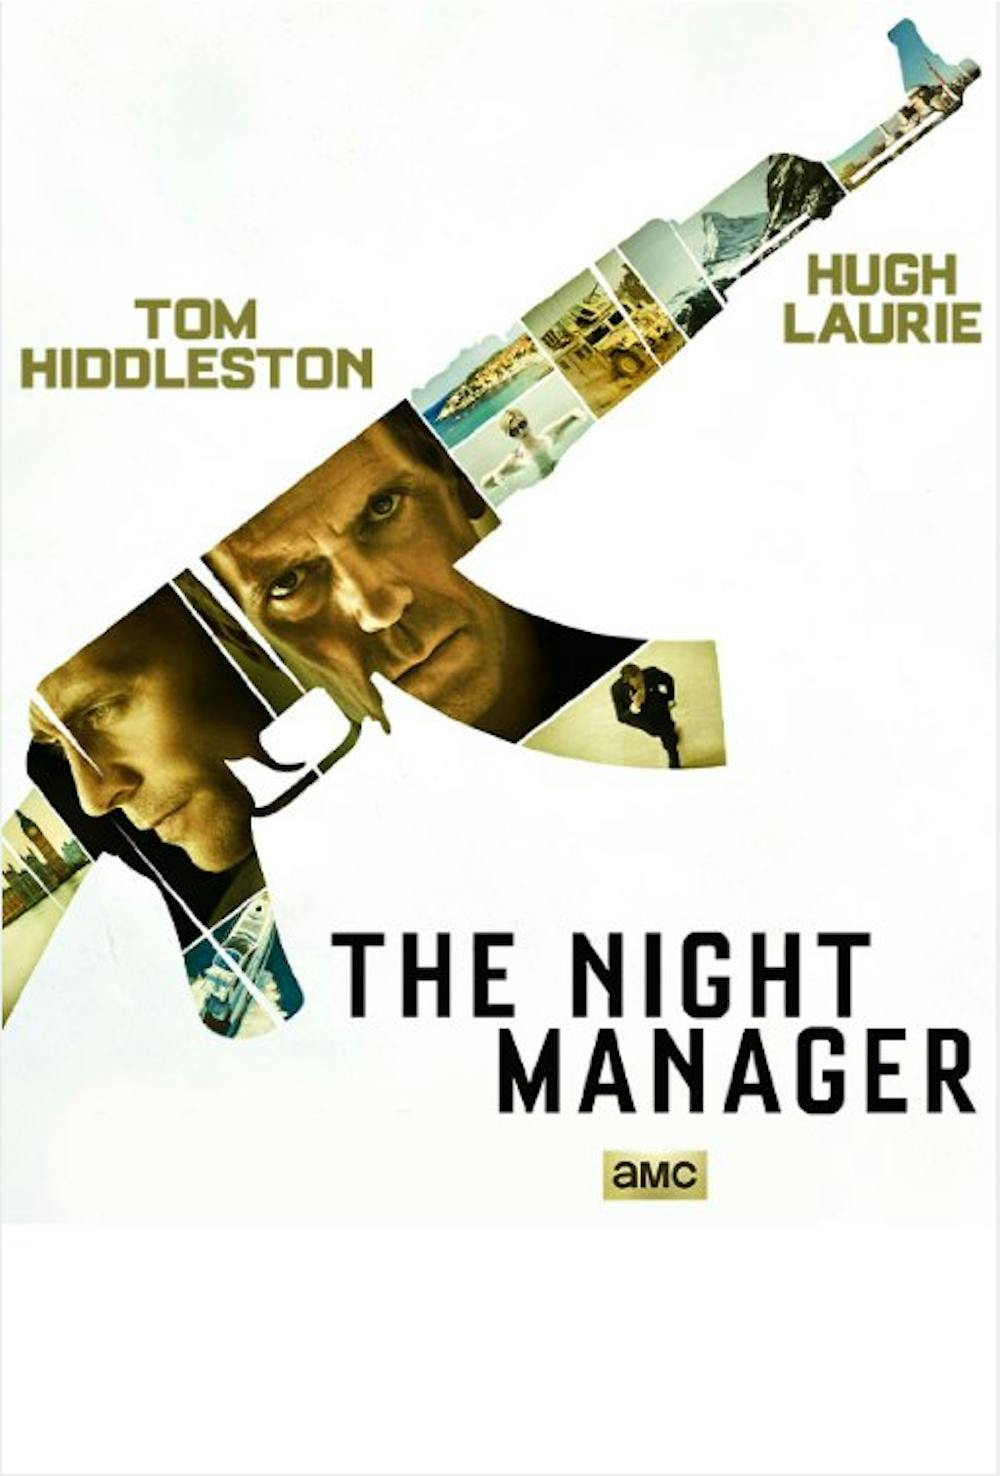 <p>Tom Hiddleston and Hugh Laurie star in "The Night Manager."</p>